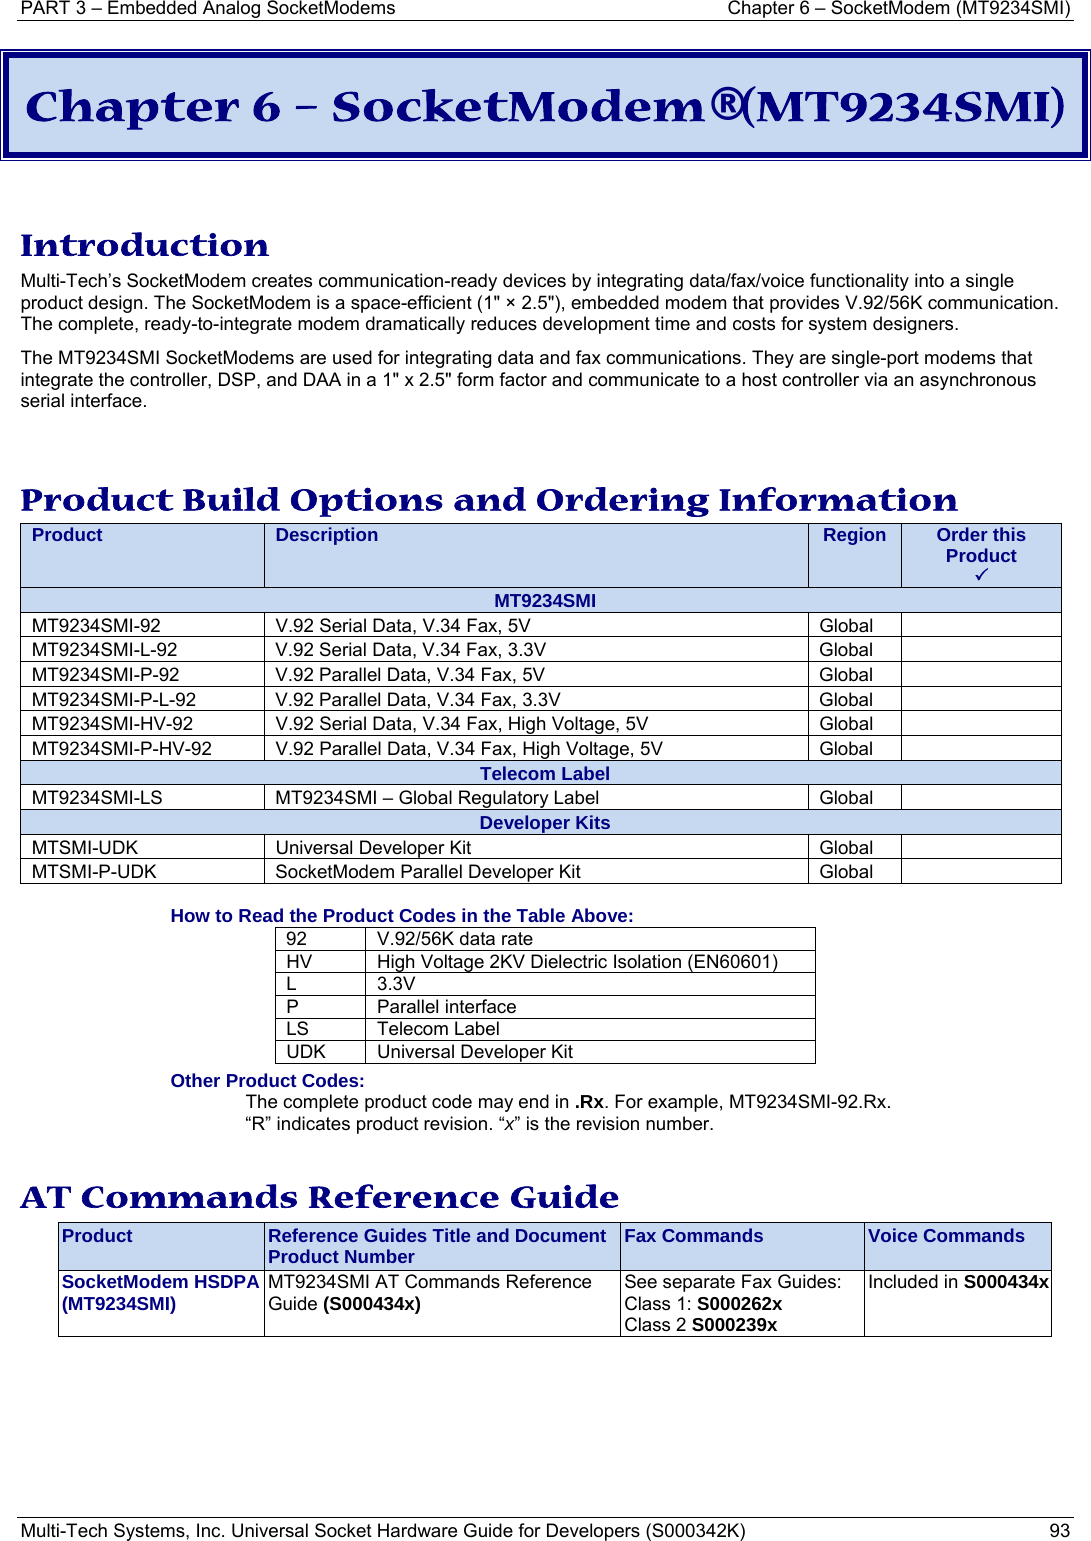 PART 3 – Embedded Analog SocketModems  Chapter 6 – SocketModem (MT9234SMI) Multi-Tech Systems, Inc. Universal Socket Hardware Guide for Developers (S000342K)  93  Chapter 6 – SocketModem® (MT9234SMI)   Introduction Multi-Tech’s SocketModem creates communication-ready devices by integrating data/fax/voice functionality into a single product design. The SocketModem is a space-efficient (1&quot; × 2.5&quot;), embedded modem that provides V.92/56K communication. The complete, ready-to-integrate modem dramatically reduces development time and costs for system designers.  The MT9234SMI SocketModems are used for integrating data and fax communications. They are single-port modems that integrate the controller, DSP, and DAA in a 1&quot; x 2.5&quot; form factor and communicate to a host controller via an asynchronous serial interface.   Product Build Options and Ordering Information Product  Description  Region  Order this Product 3MT9234SMI MT9234SMI-92  V.92 Serial Data, V.34 Fax, 5V  Global   MT9234SMI-L-92  V.92 Serial Data, V.34 Fax, 3.3V  Global   MT9234SMI-P-92  V.92 Parallel Data, V.34 Fax, 5V  Global   MT9234SMI-P-L-92  V.92 Parallel Data, V.34 Fax, 3.3V  Global   MT9234SMI-HV-92  V.92 Serial Data, V.34 Fax, High Voltage, 5V  Global   MT9234SMI-P-HV-92  V.92 Parallel Data, V.34 Fax, High Voltage, 5V  Global   Telecom Label MT9234SMI-LS  MT9234SMI – Global Regulatory Label  Global   Developer Kits MTSMI-UDK  Universal Developer Kit  Global   MTSMI-P-UDK  SocketModem Parallel Developer Kit  Global    How to Read the Product Codes in the Table Above: 92  V.92/56K data rate HV  High Voltage 2KV Dielectric Isolation (EN60601) L   3.3V P Parallel interface LS Telecom Label UDK  Universal Developer Kit Other Product Codes: The complete product code may end in .Rx. For example, MT9234SMI-92.Rx.   “R” indicates product revision. “x” is the revision number.  AT Commands Reference Guide Product  Reference Guides Title and Document Product Number  Fax Commands  Voice Commands SocketModem HSDPA (MT9234SMI)  MT9234SMI AT Commands Reference Guide (S000434x)  See separate Fax Guides: Class 1: S000262x Class 2 S000239x Included in S000434x  